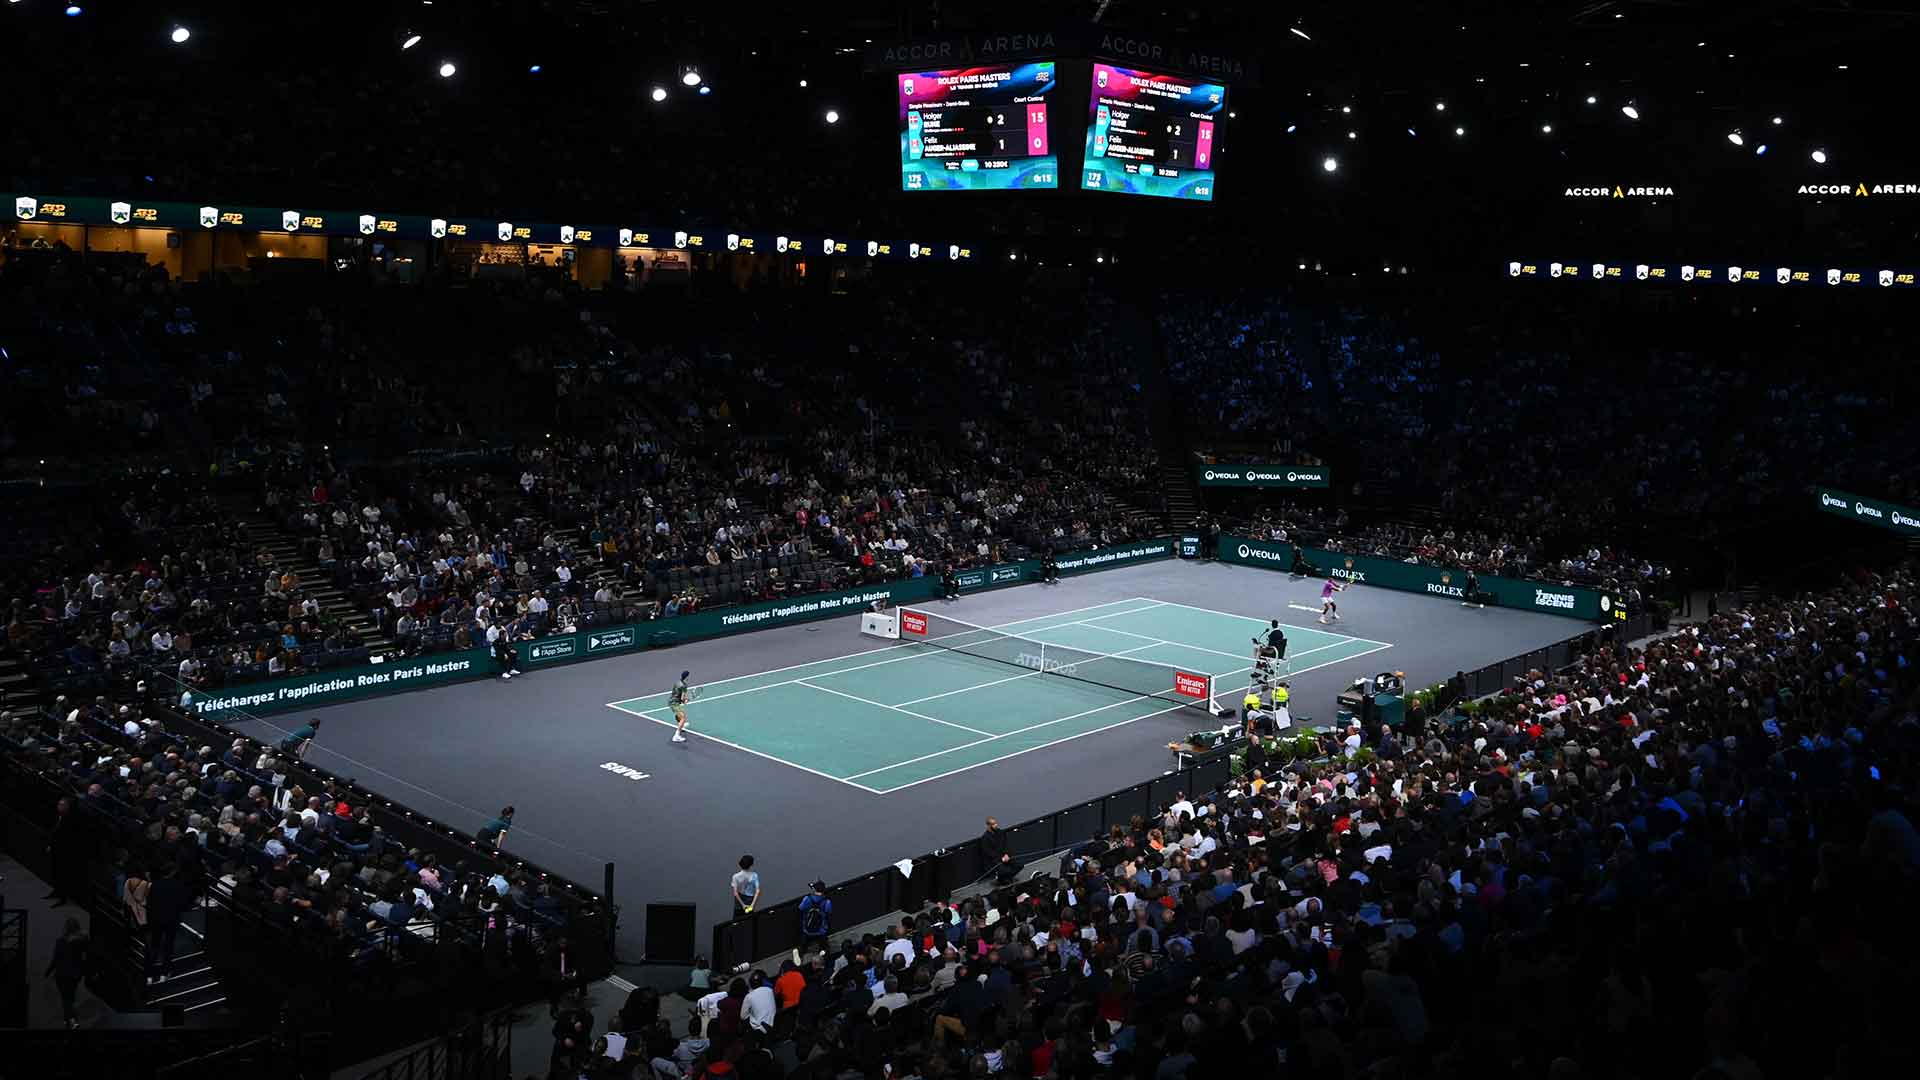 The Rolex Paris Masters will be held from 30 October-5 November.